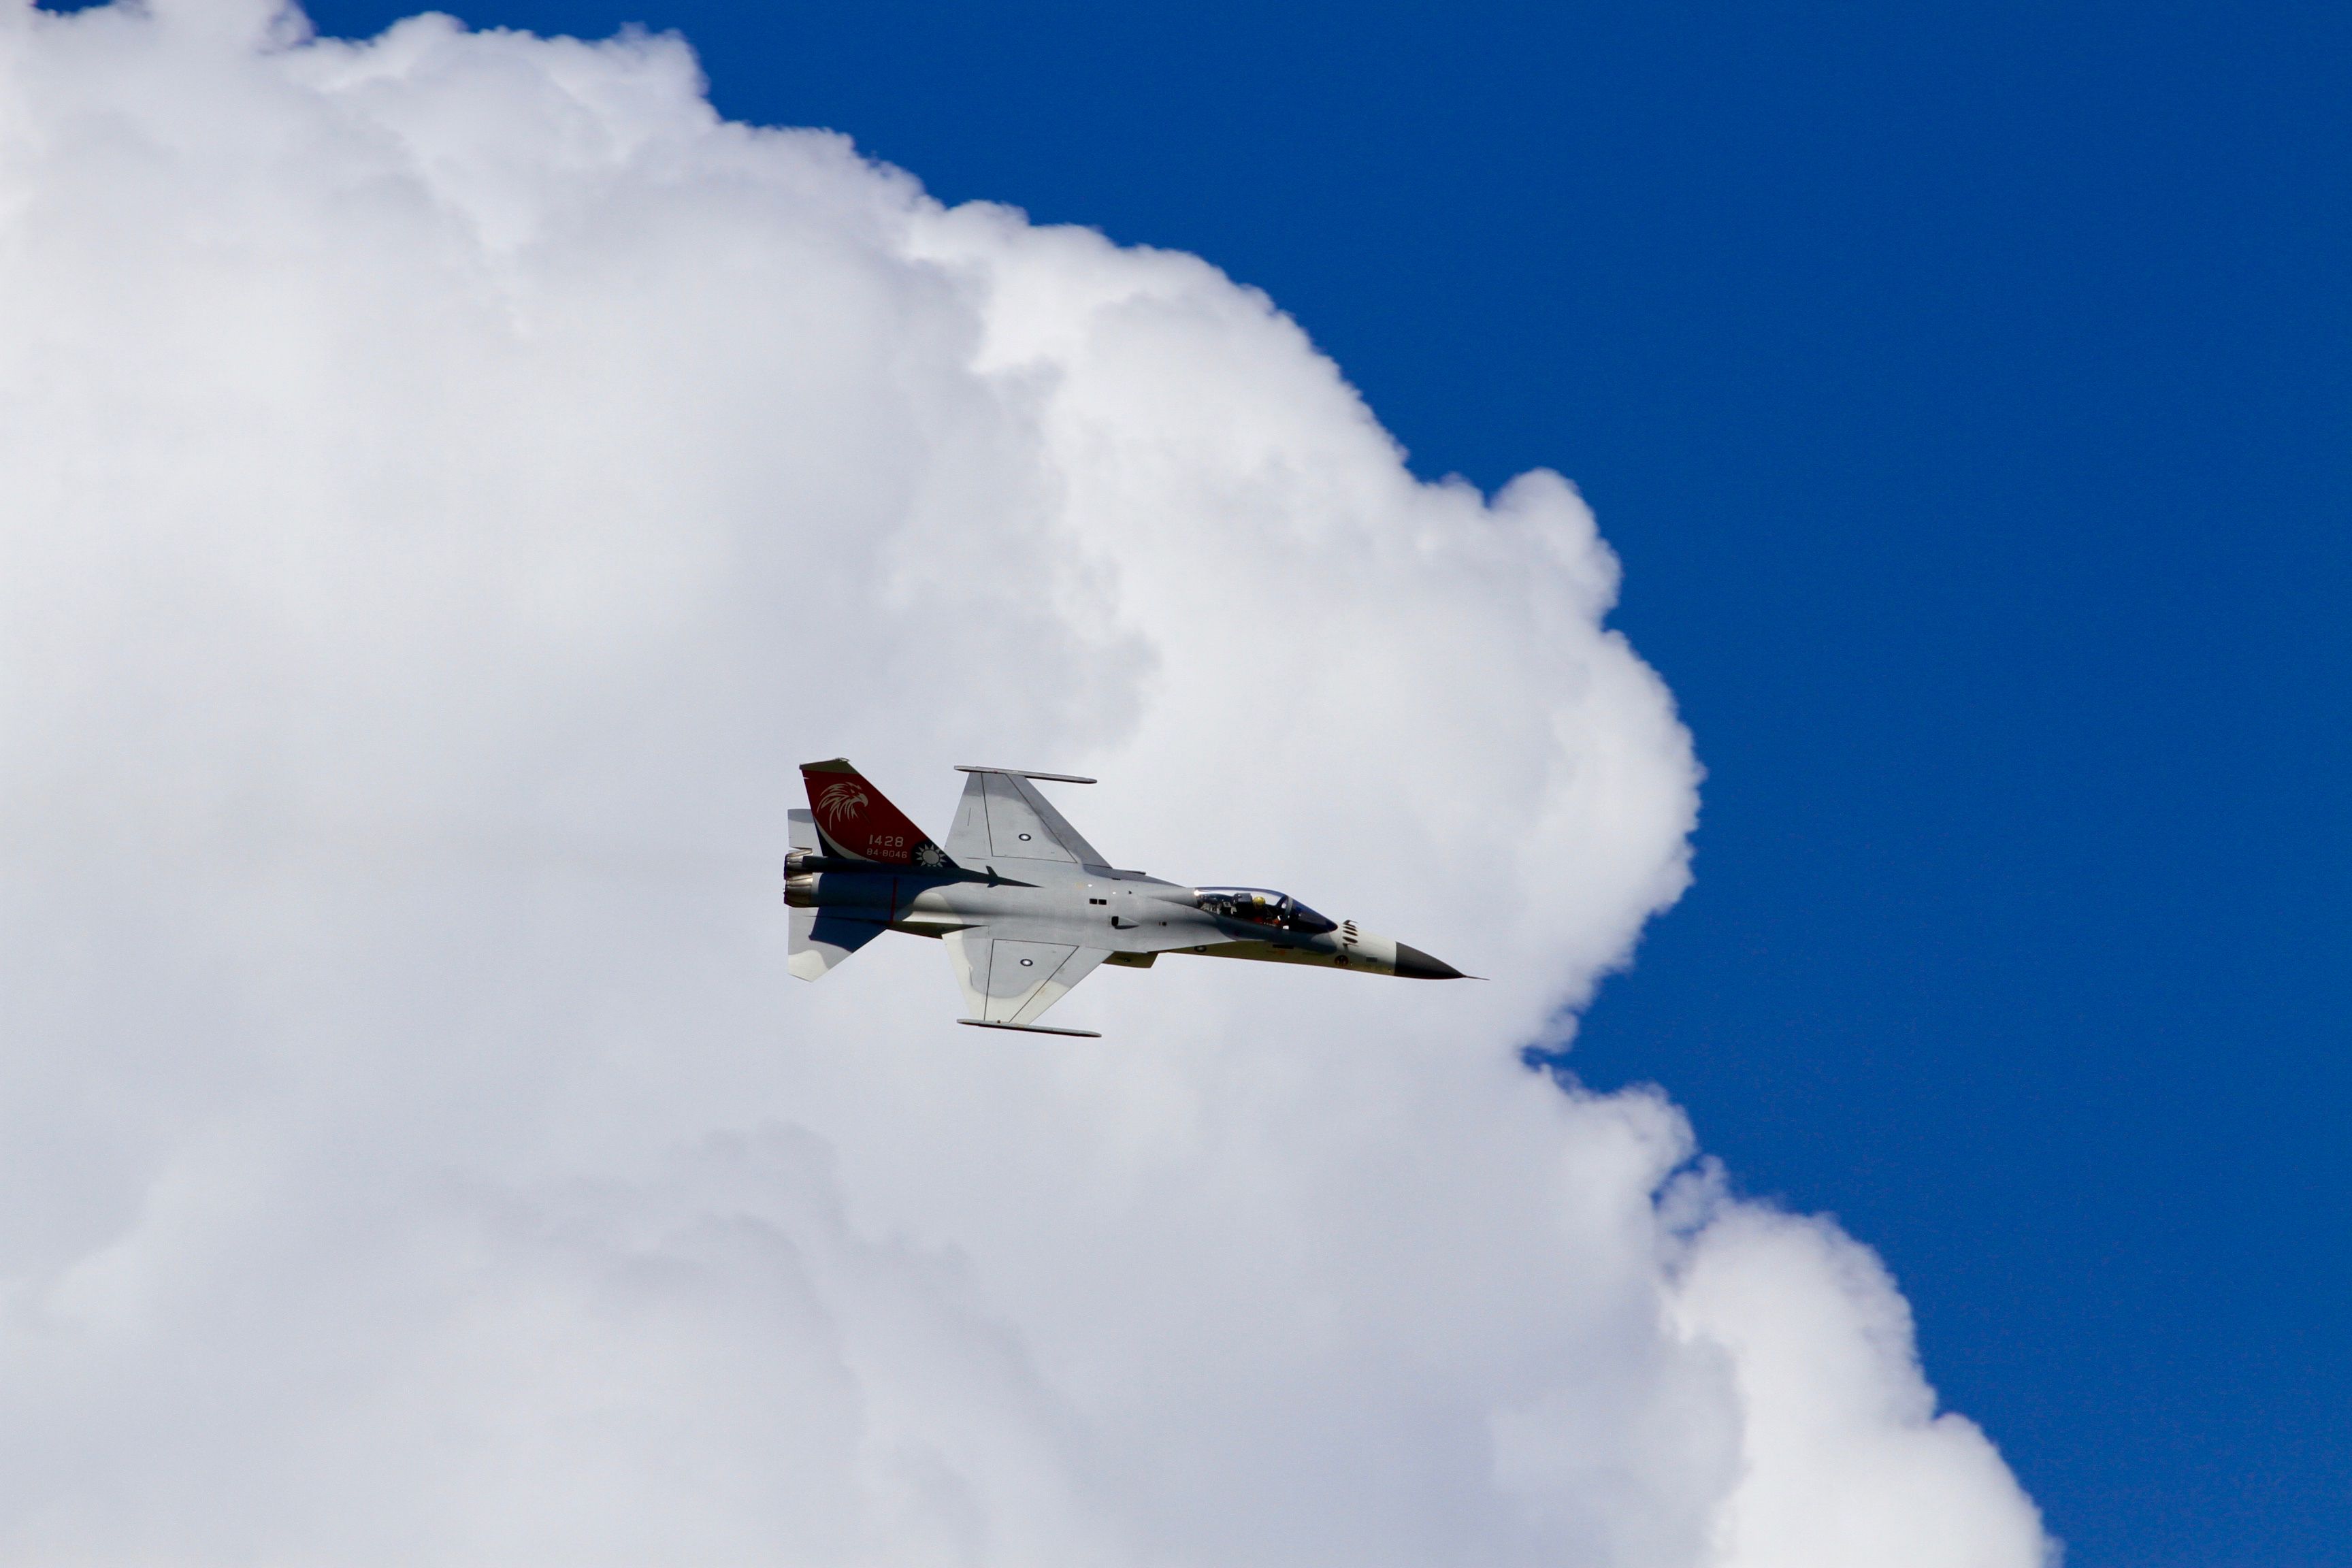 A F-CK-1 fighter flying above the Hualien Republic of China Air Force (ROCAF) Base.